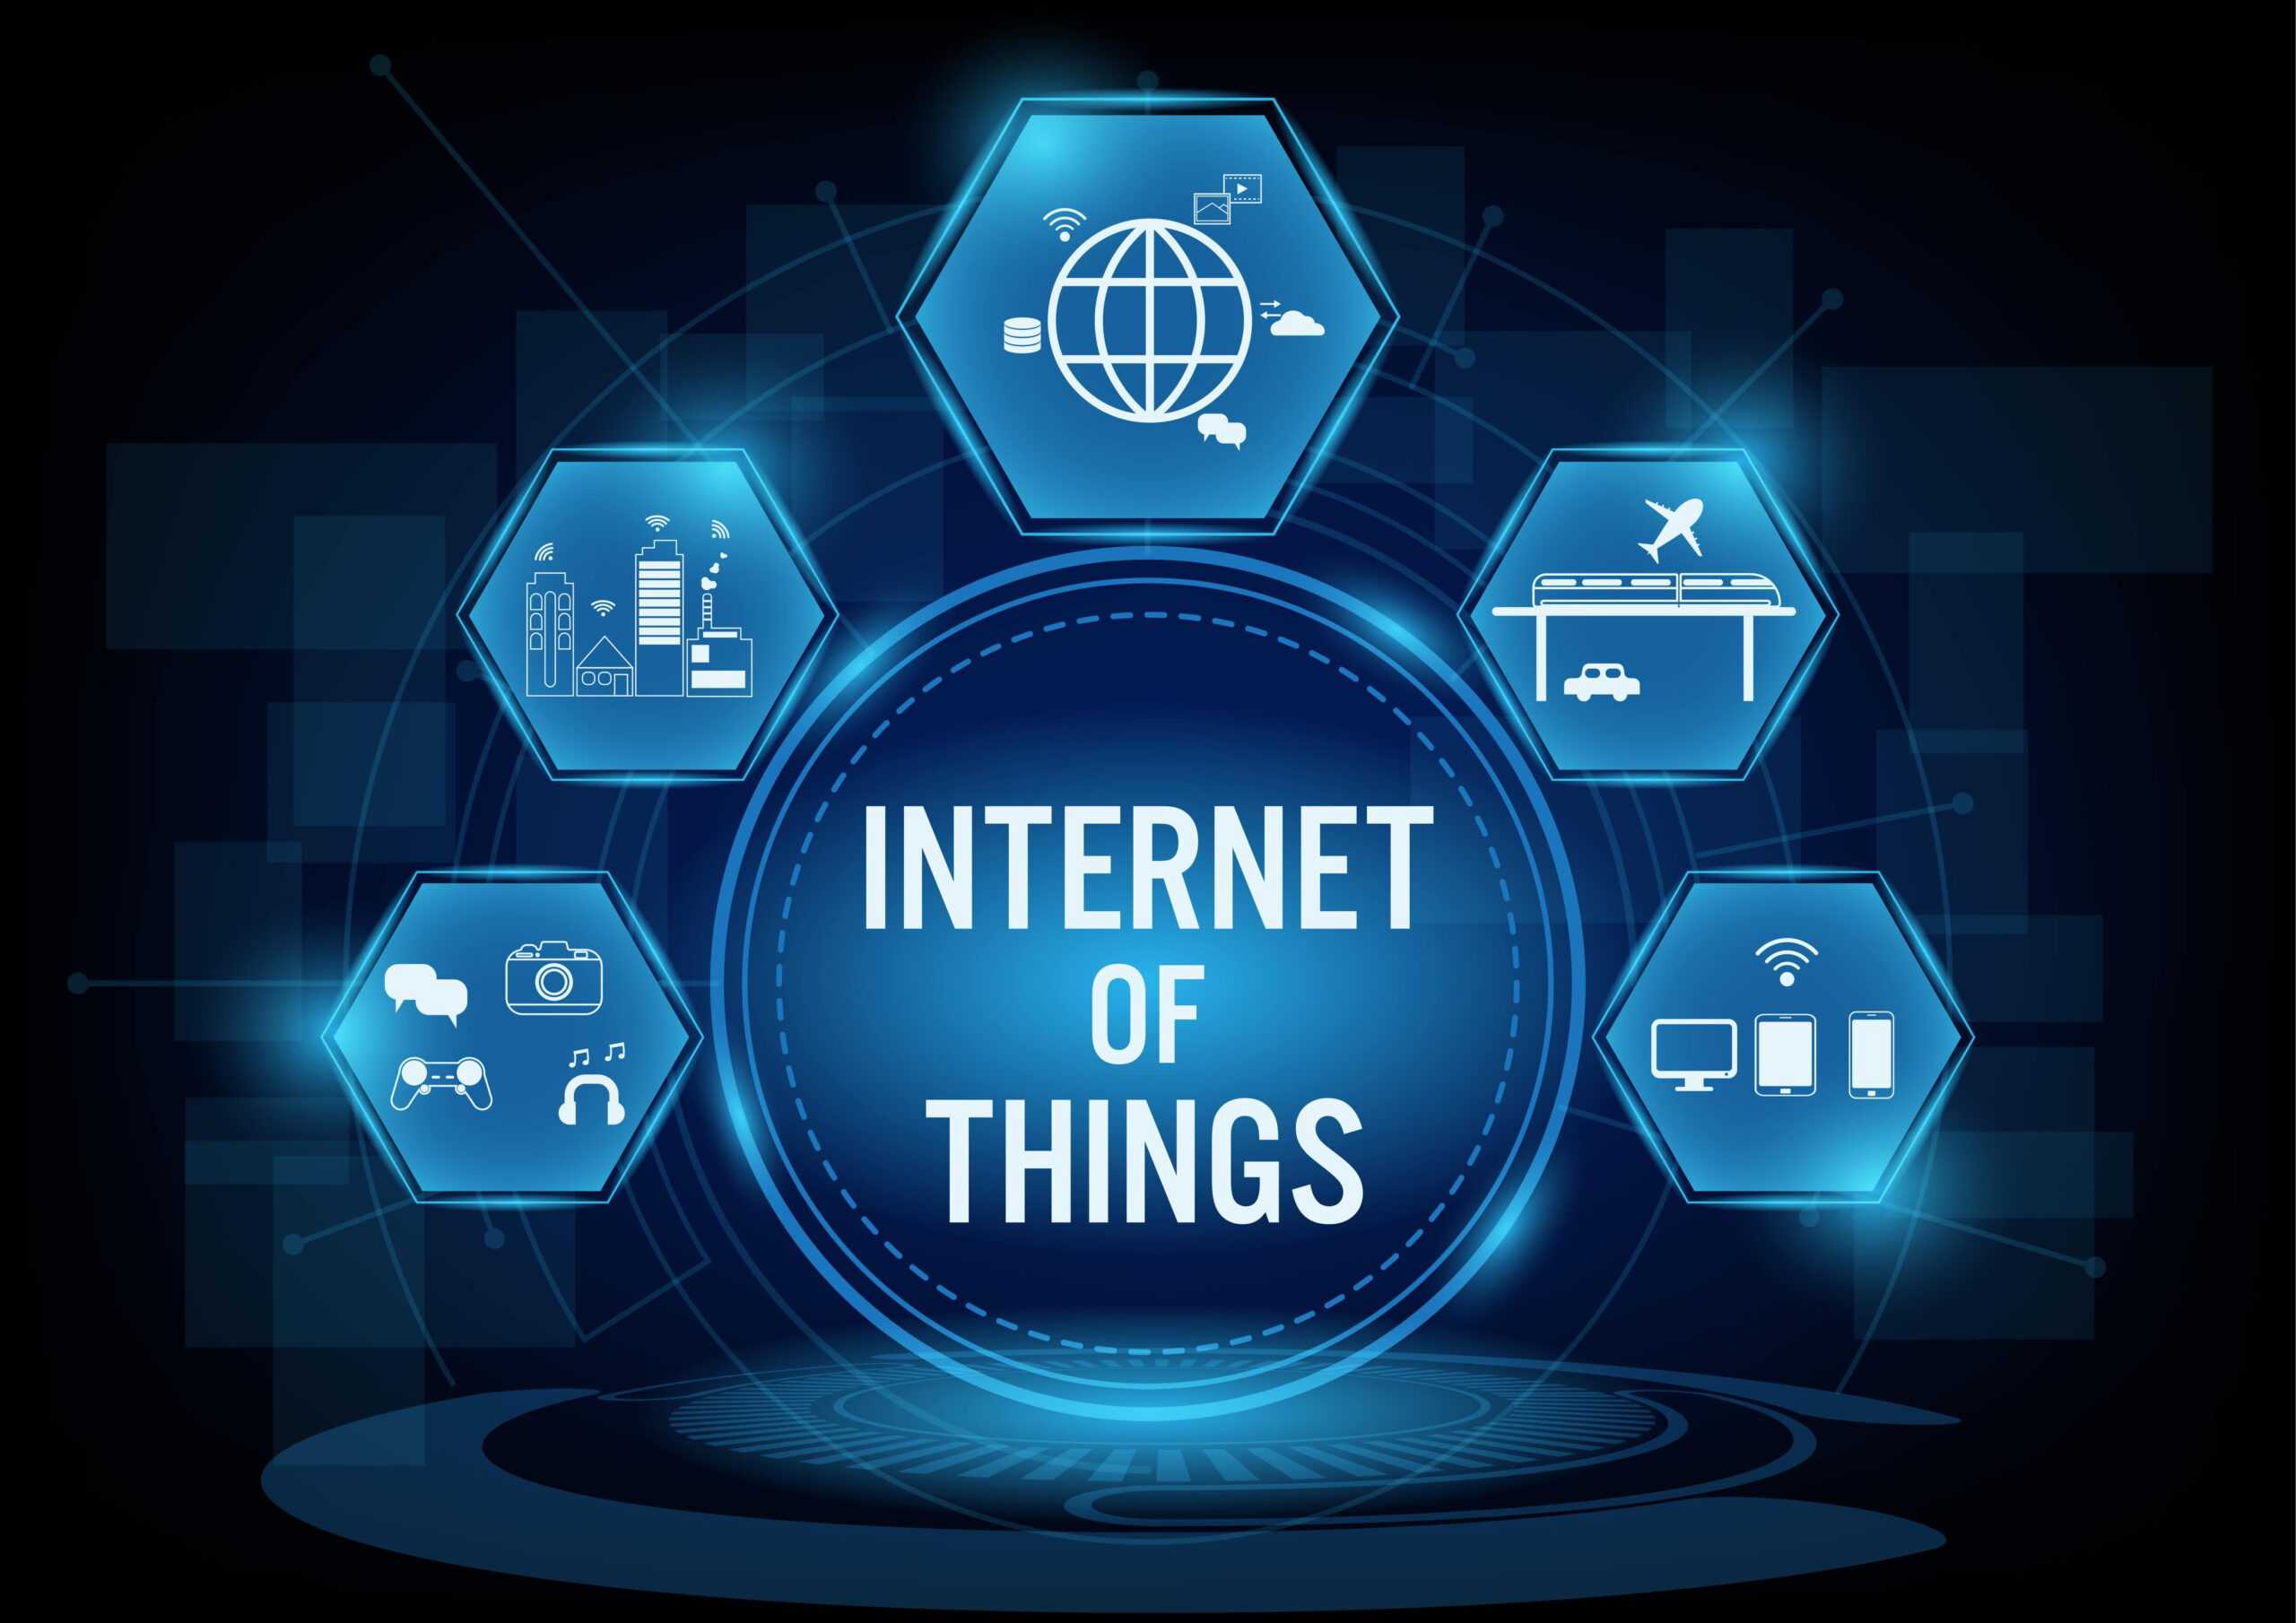 Building an IoT (Internet of Things) Project